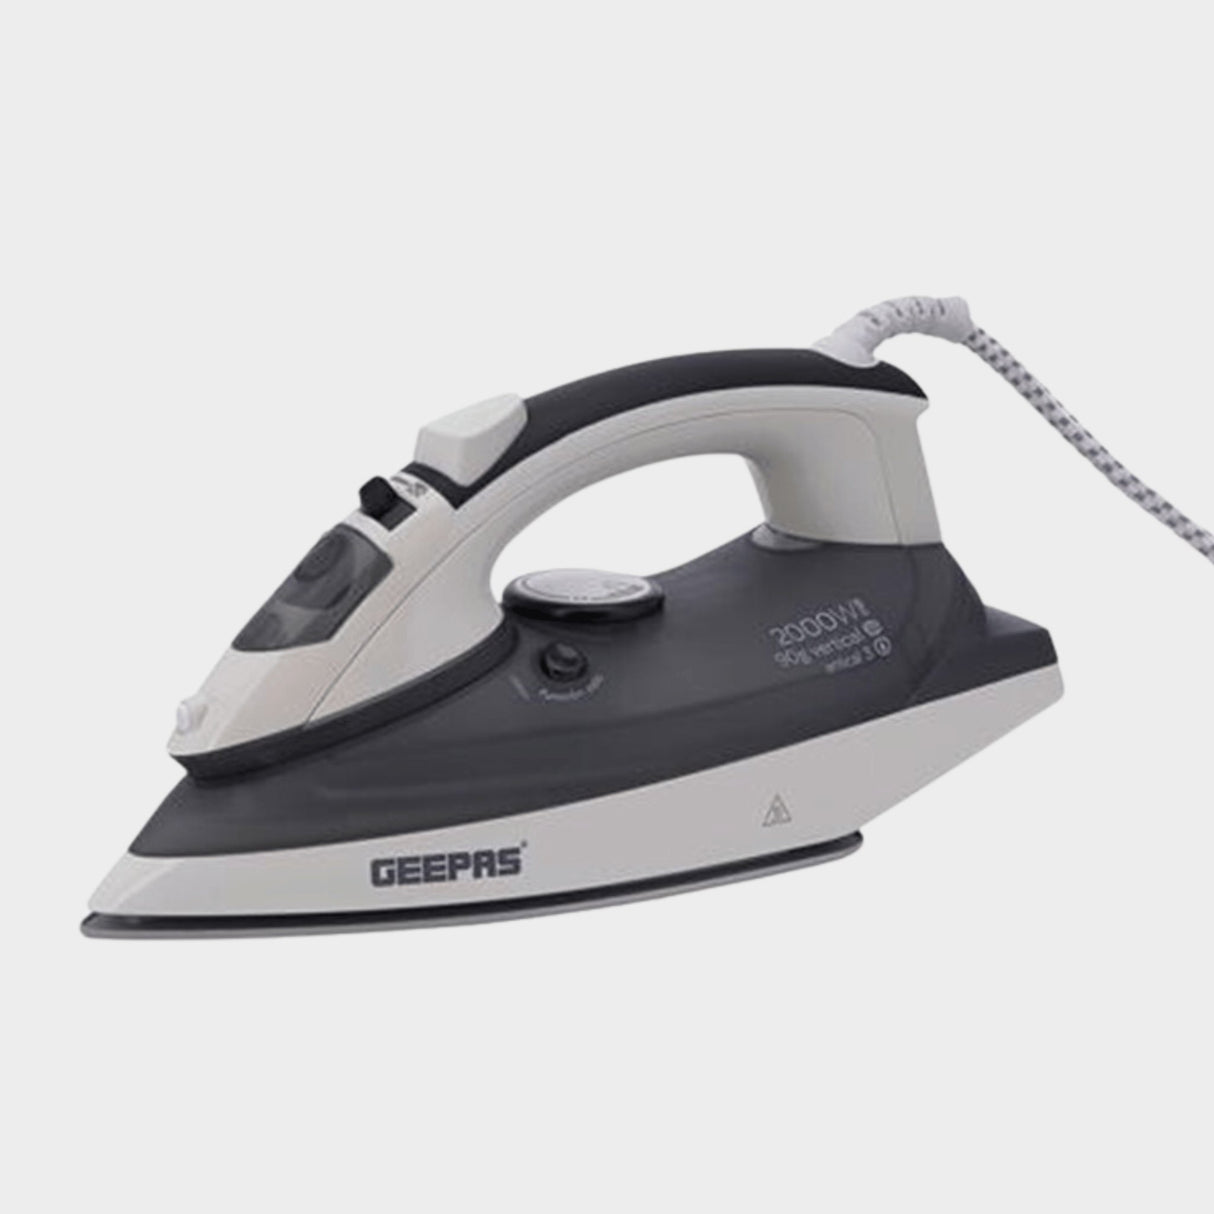 Geepas GSI7788 Ceramic Steam Iron 2400W - Temperature Control & Self Cleaning" - KWT Tech Mart